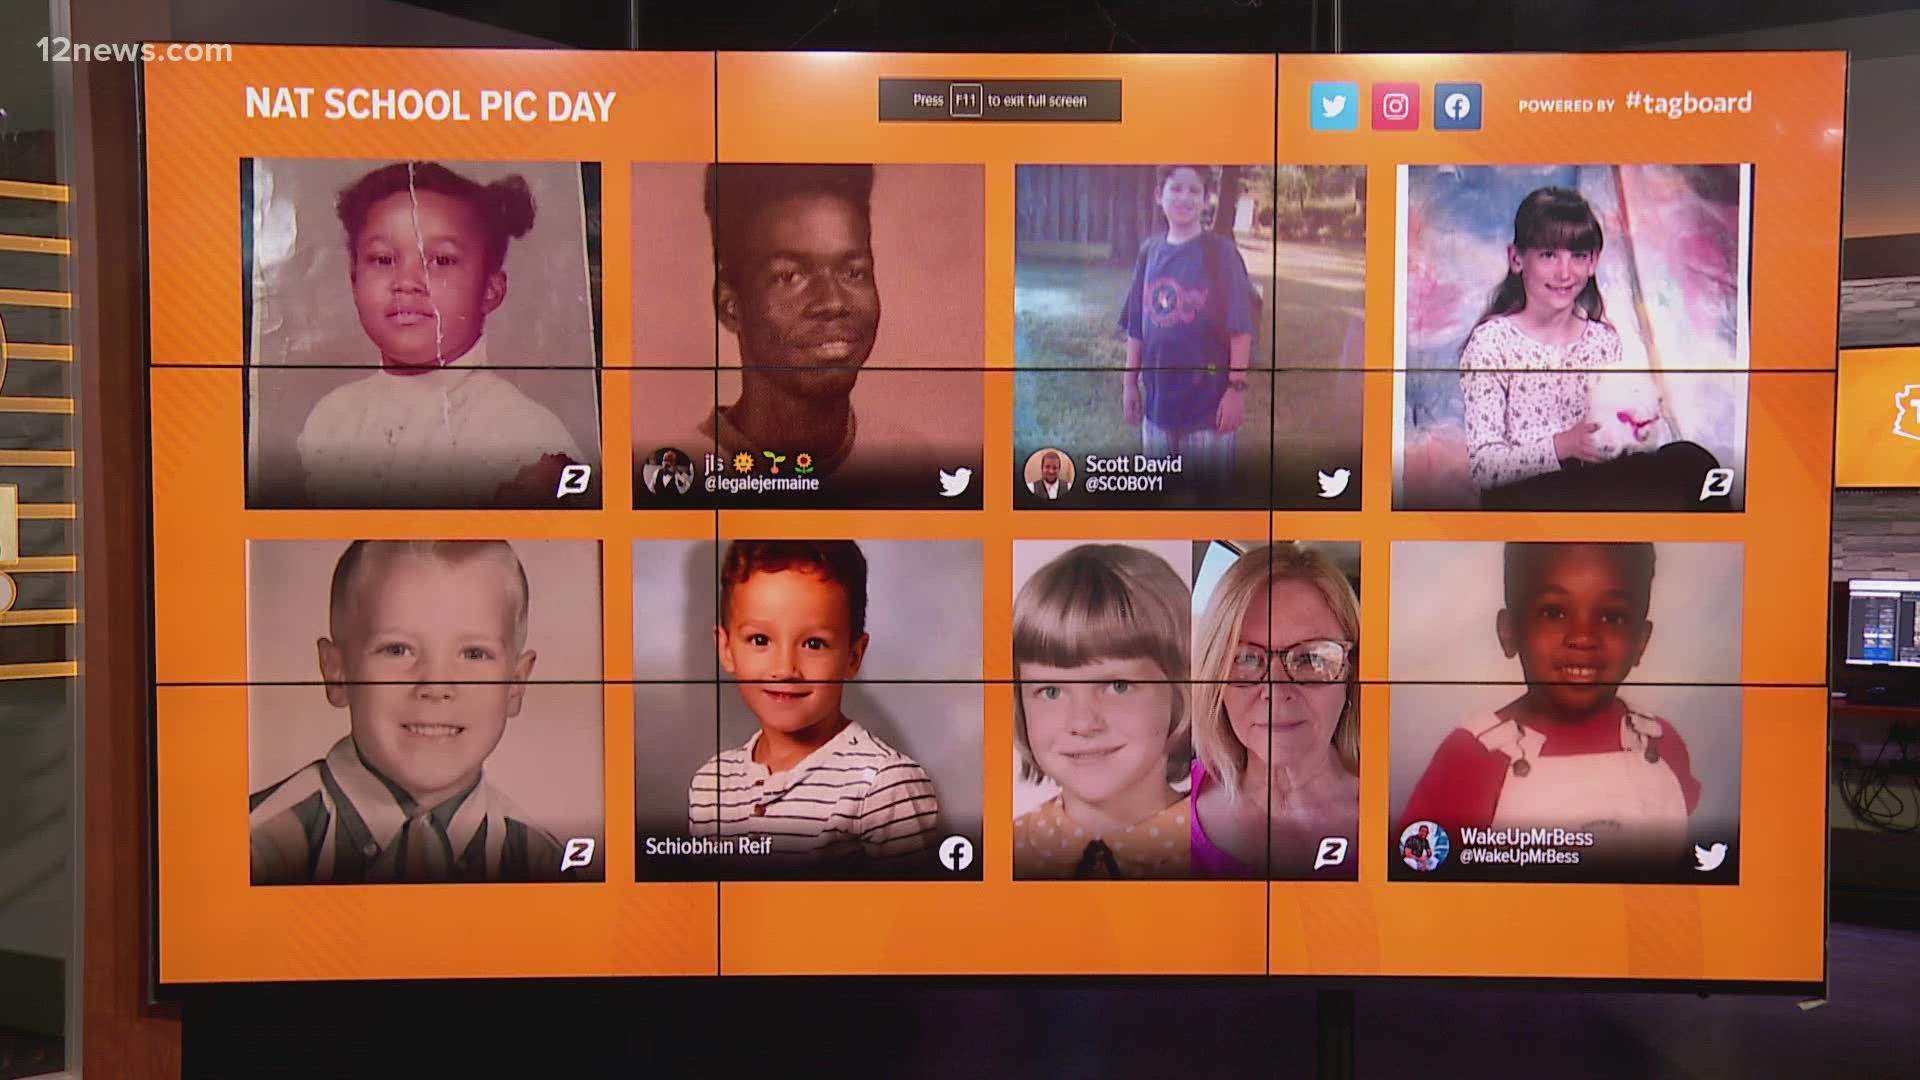 Feel free to text us your school picture at (602) 444-1212 for a chance to be featured on Today in AZ!